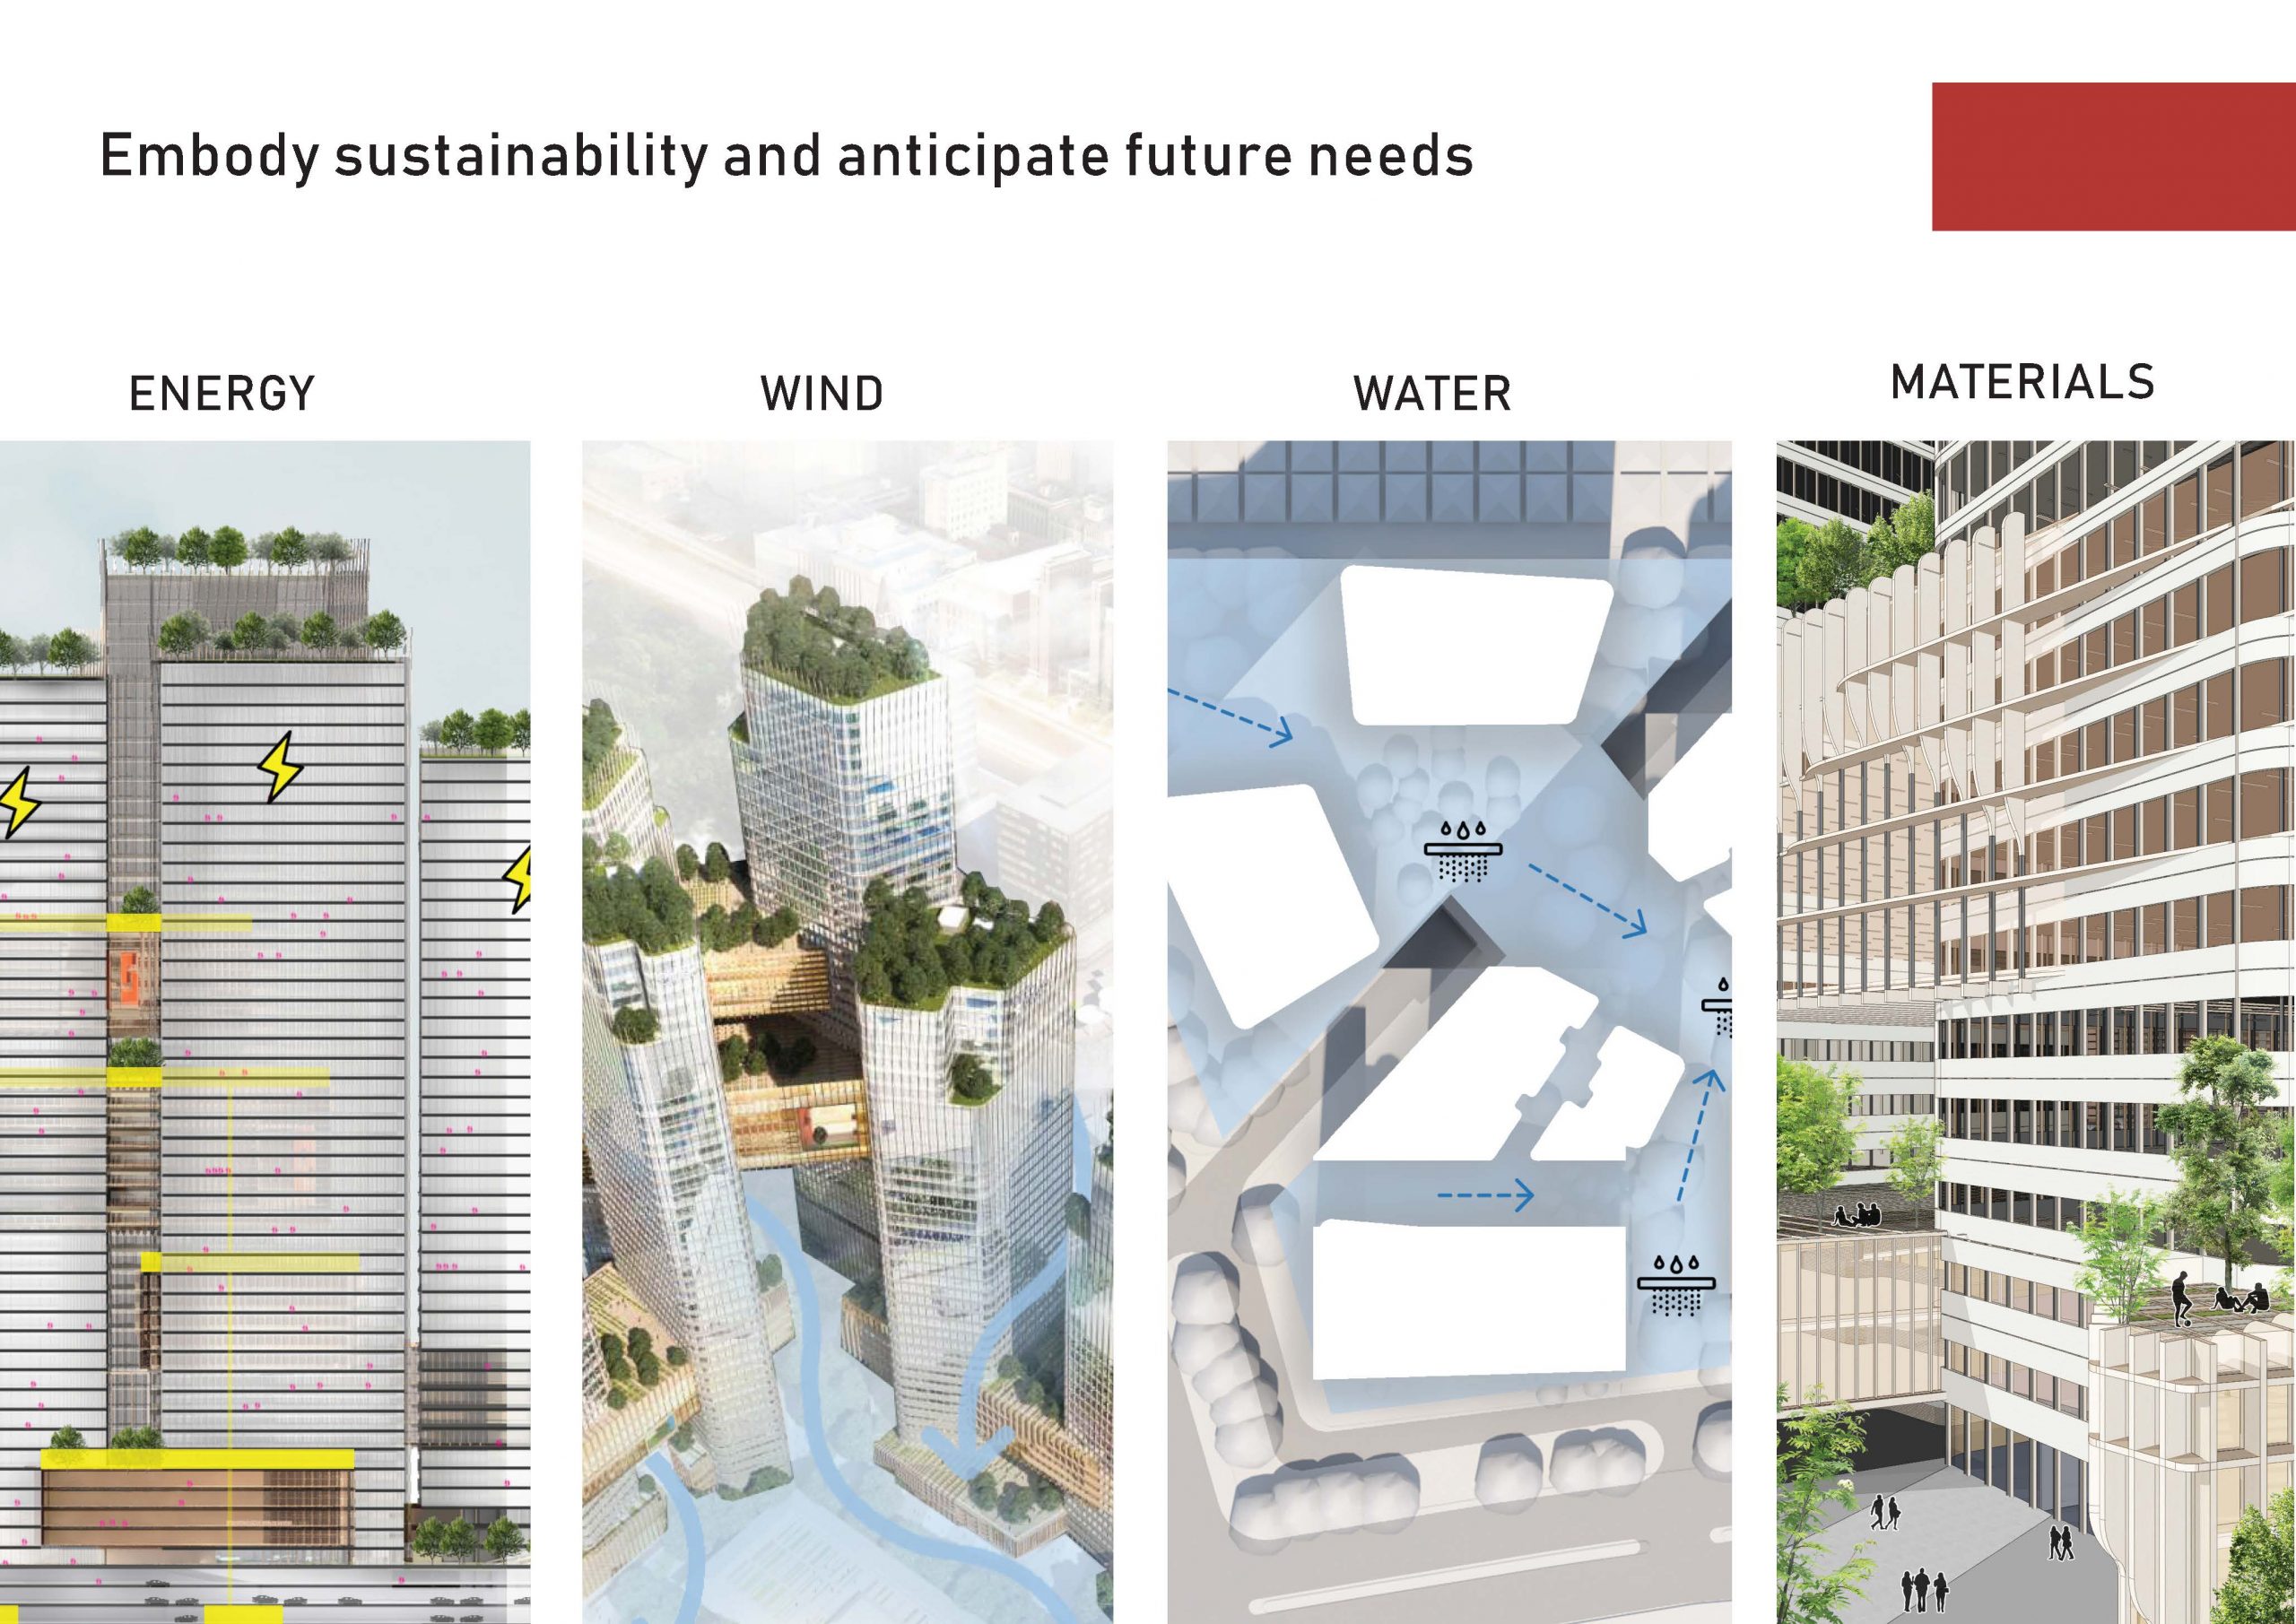 Psalm East Grid embodies sustainability and anticipate future needs in terms of energy, wind, water and materials